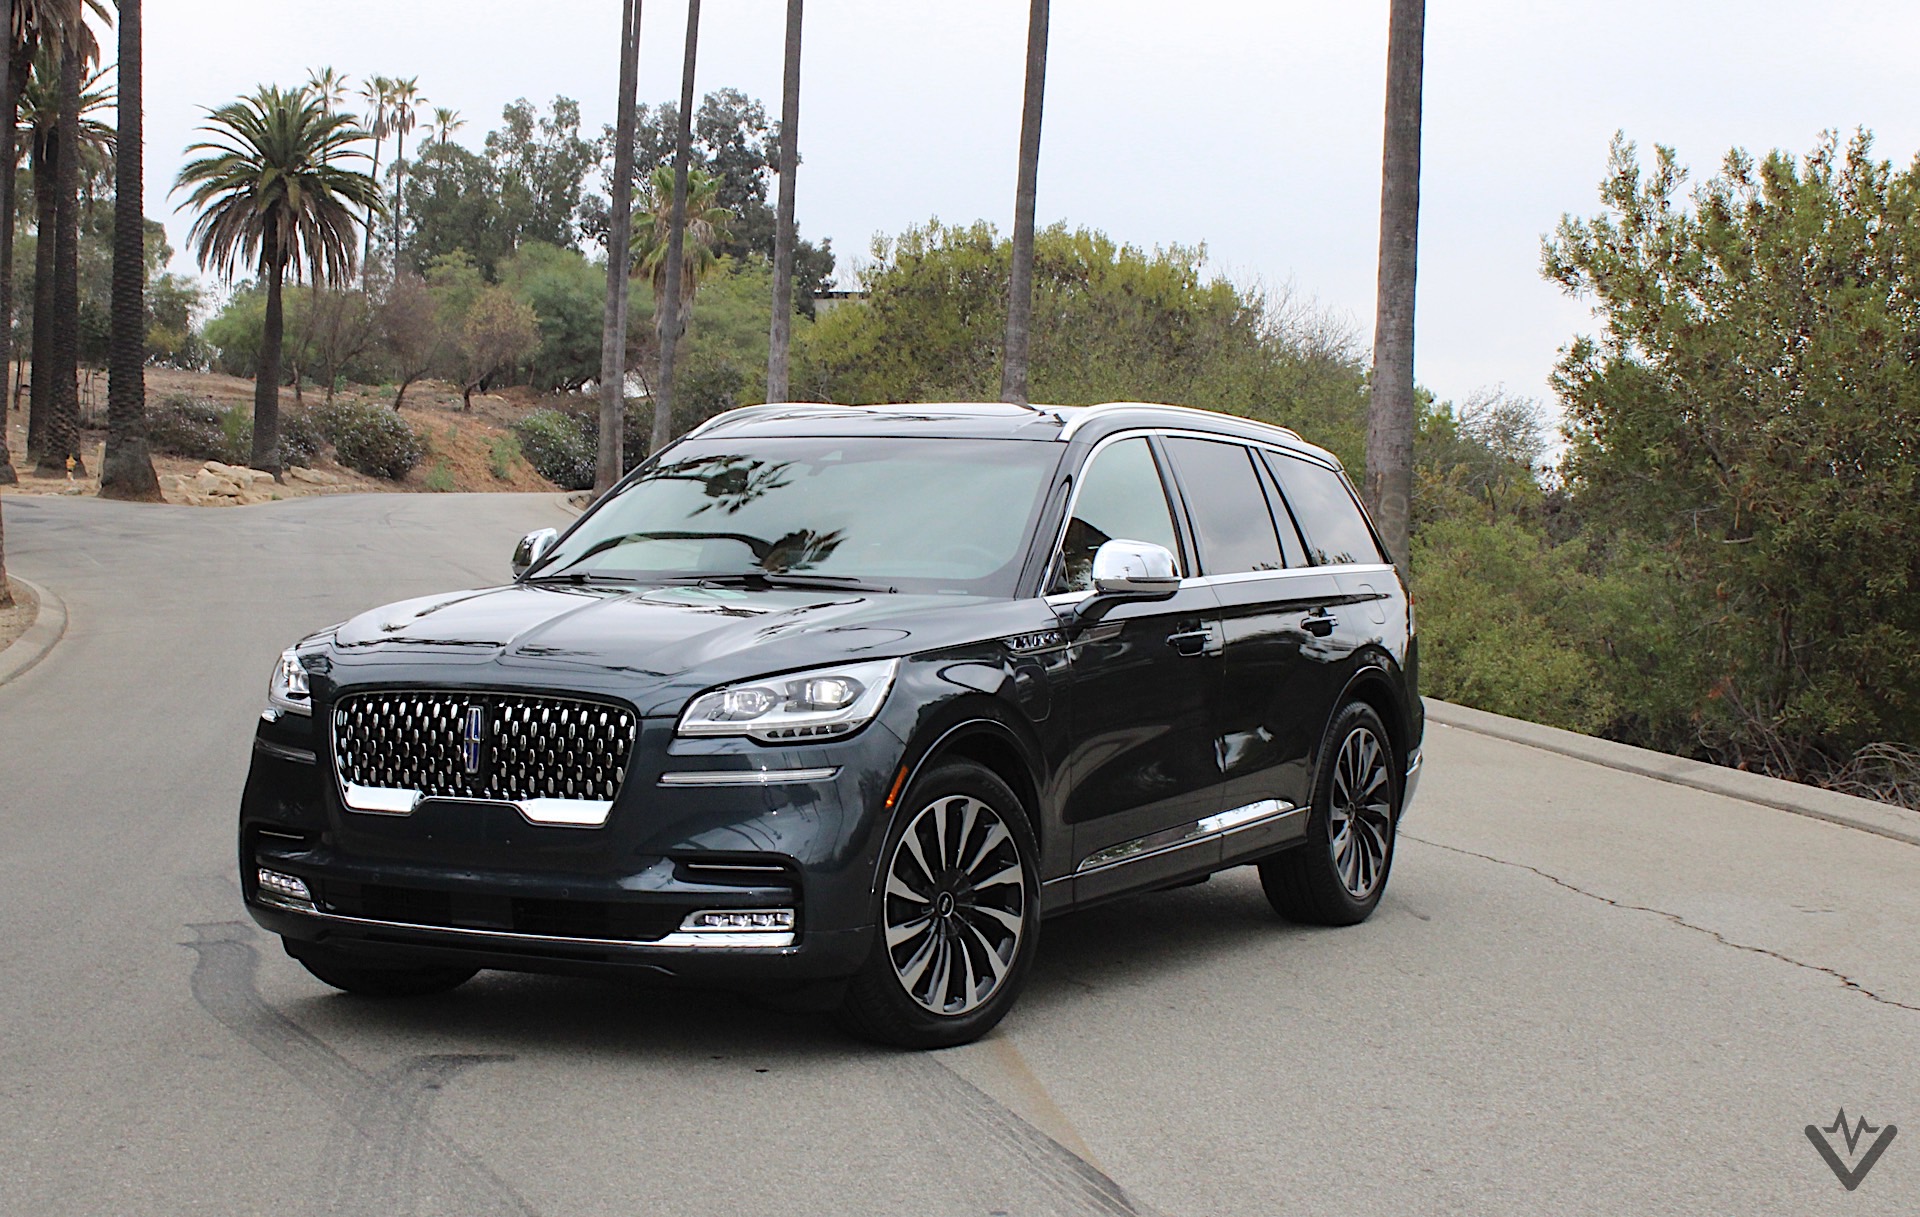 2021 Lincoln Aviator Grand Touring front three quarters 01